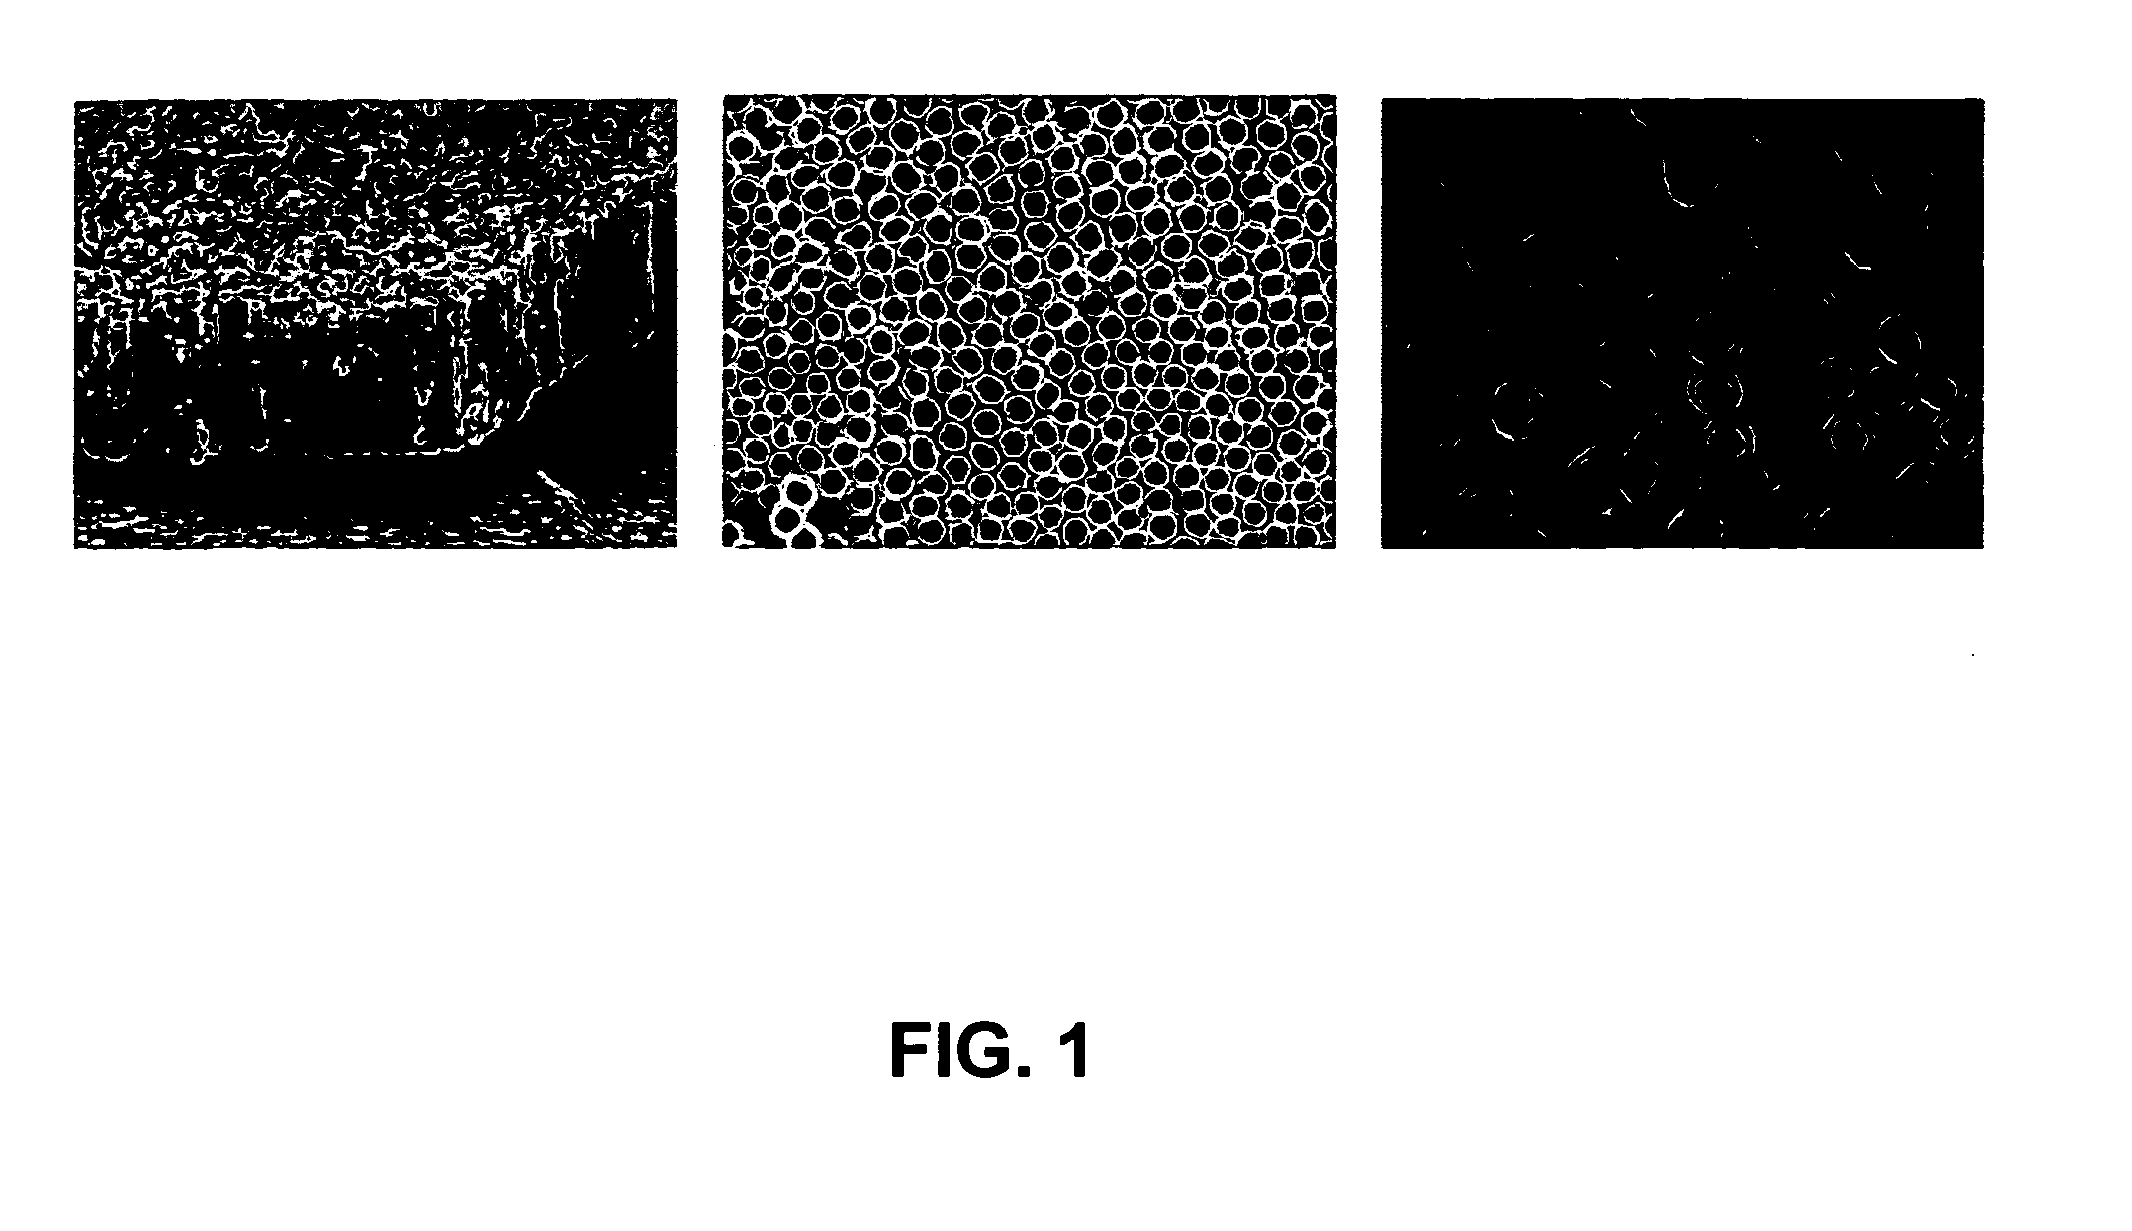 Nanostructure surface coated medical implants and methods of using the same